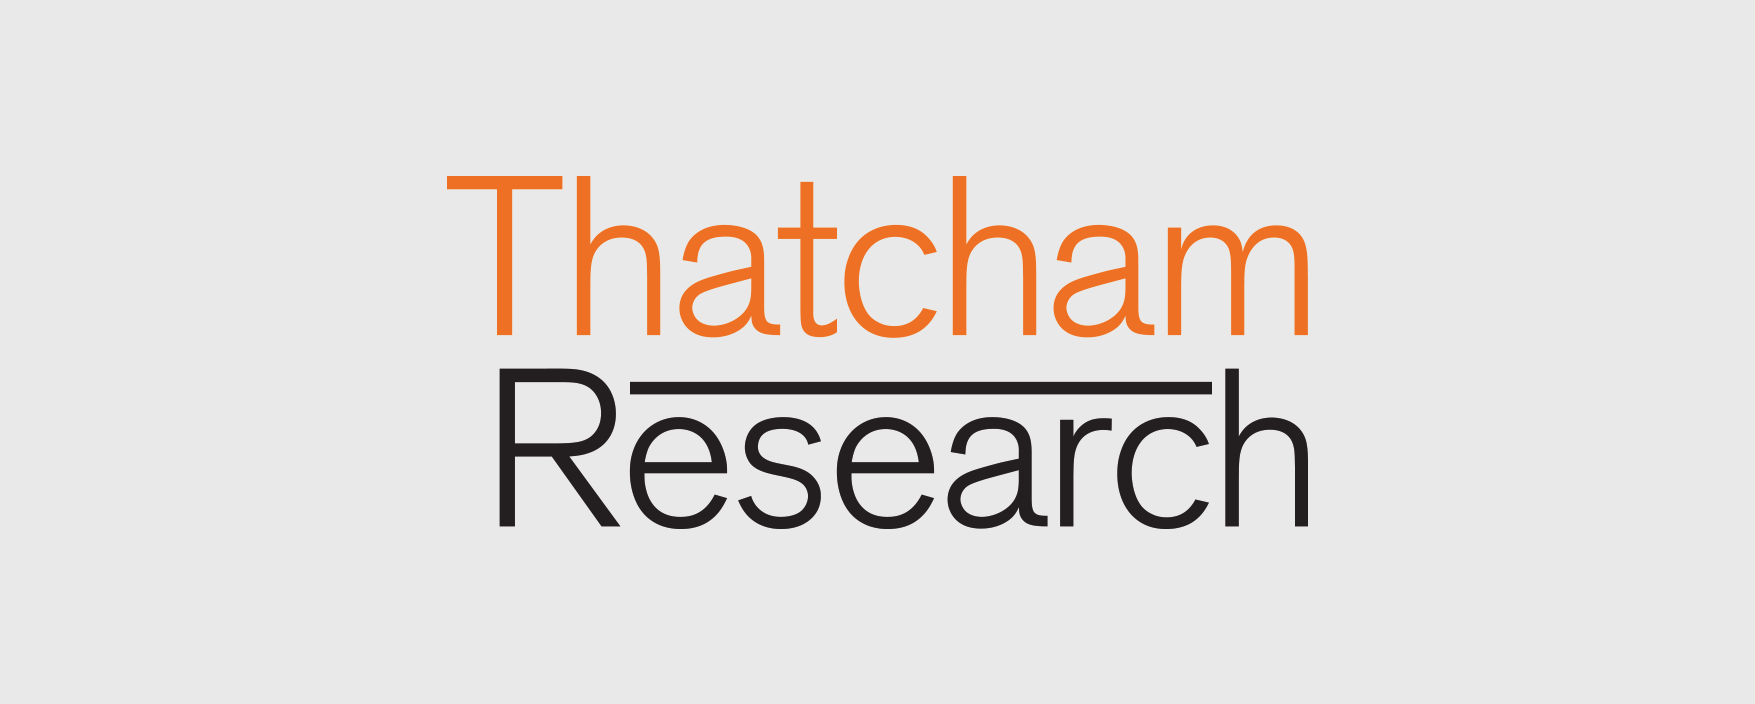 Thatcham-Research.png